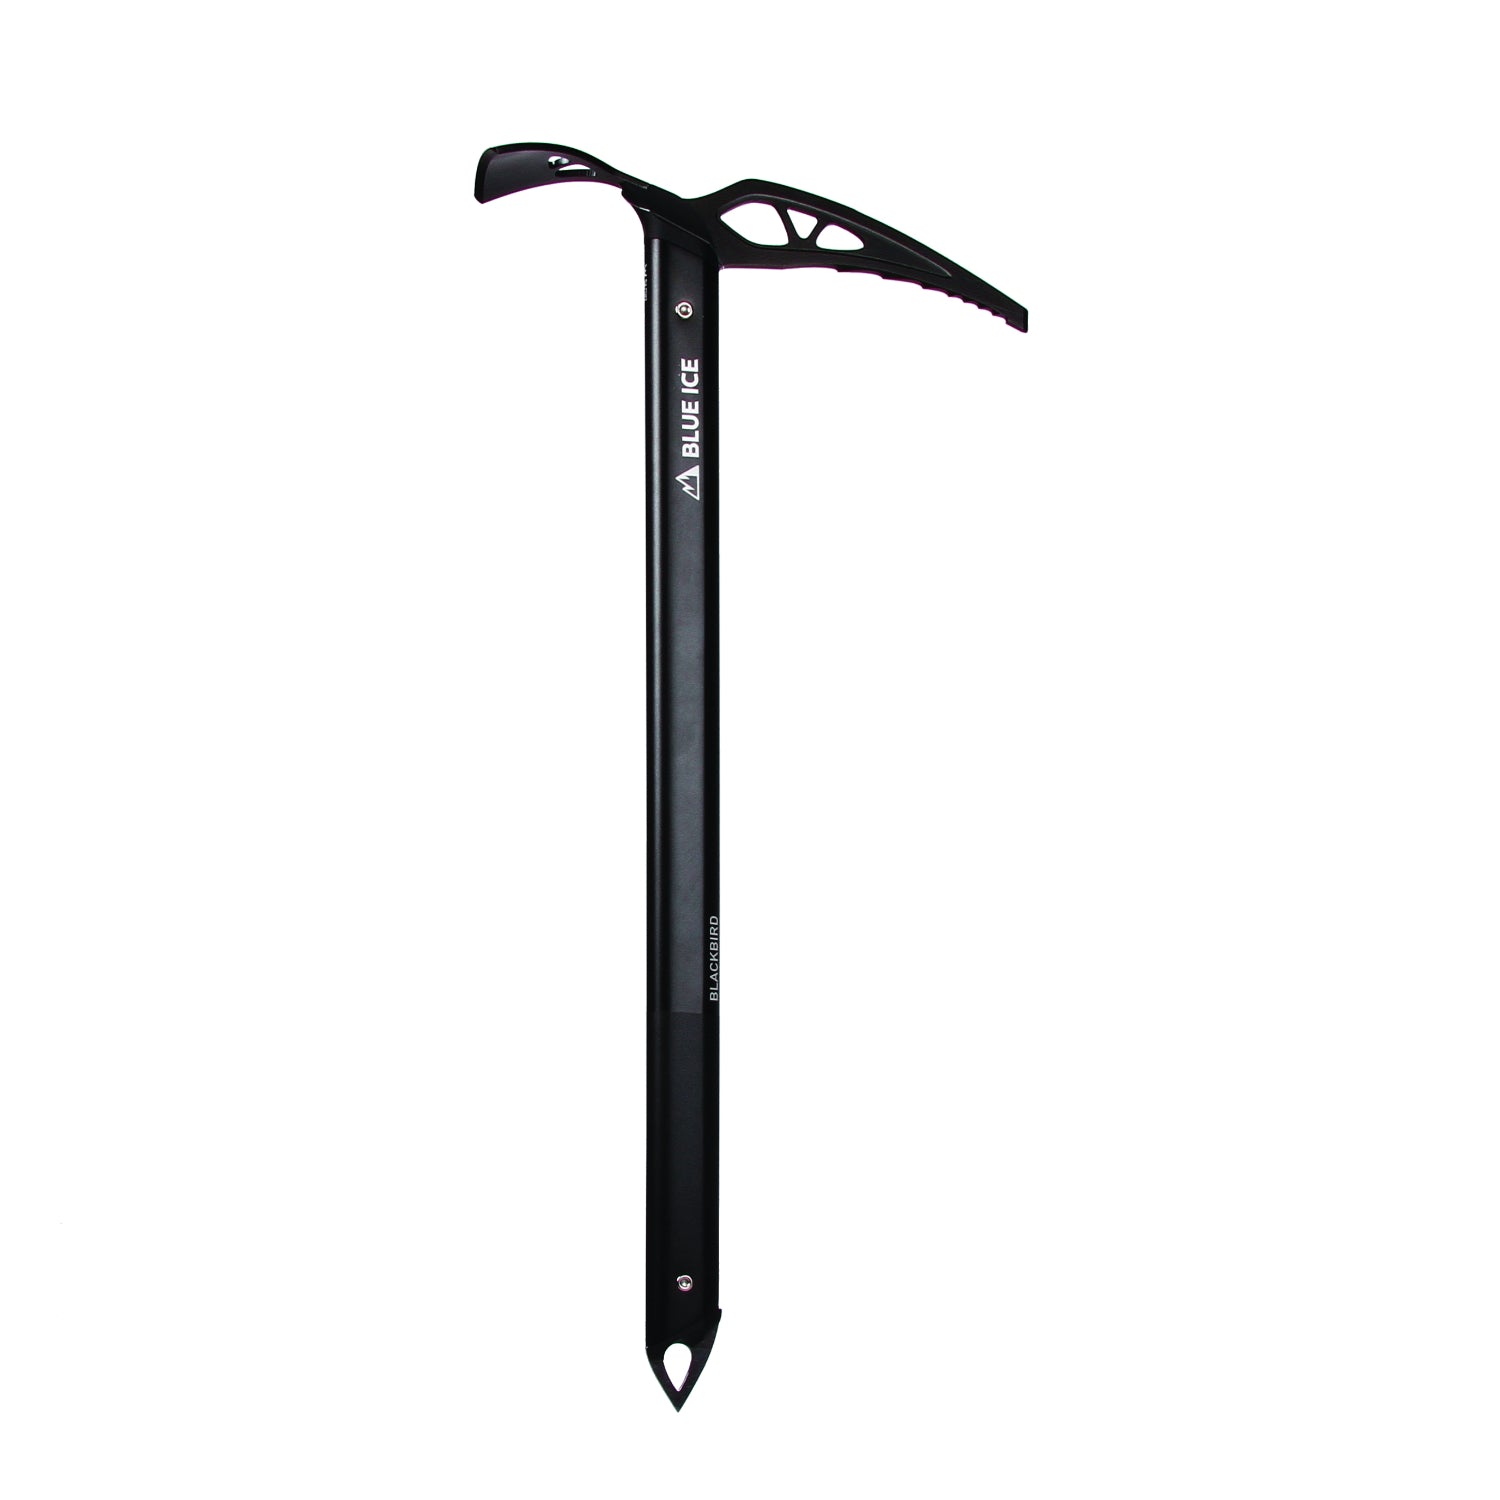 Blue Ice Blackbird ice axe with pick and spike protector